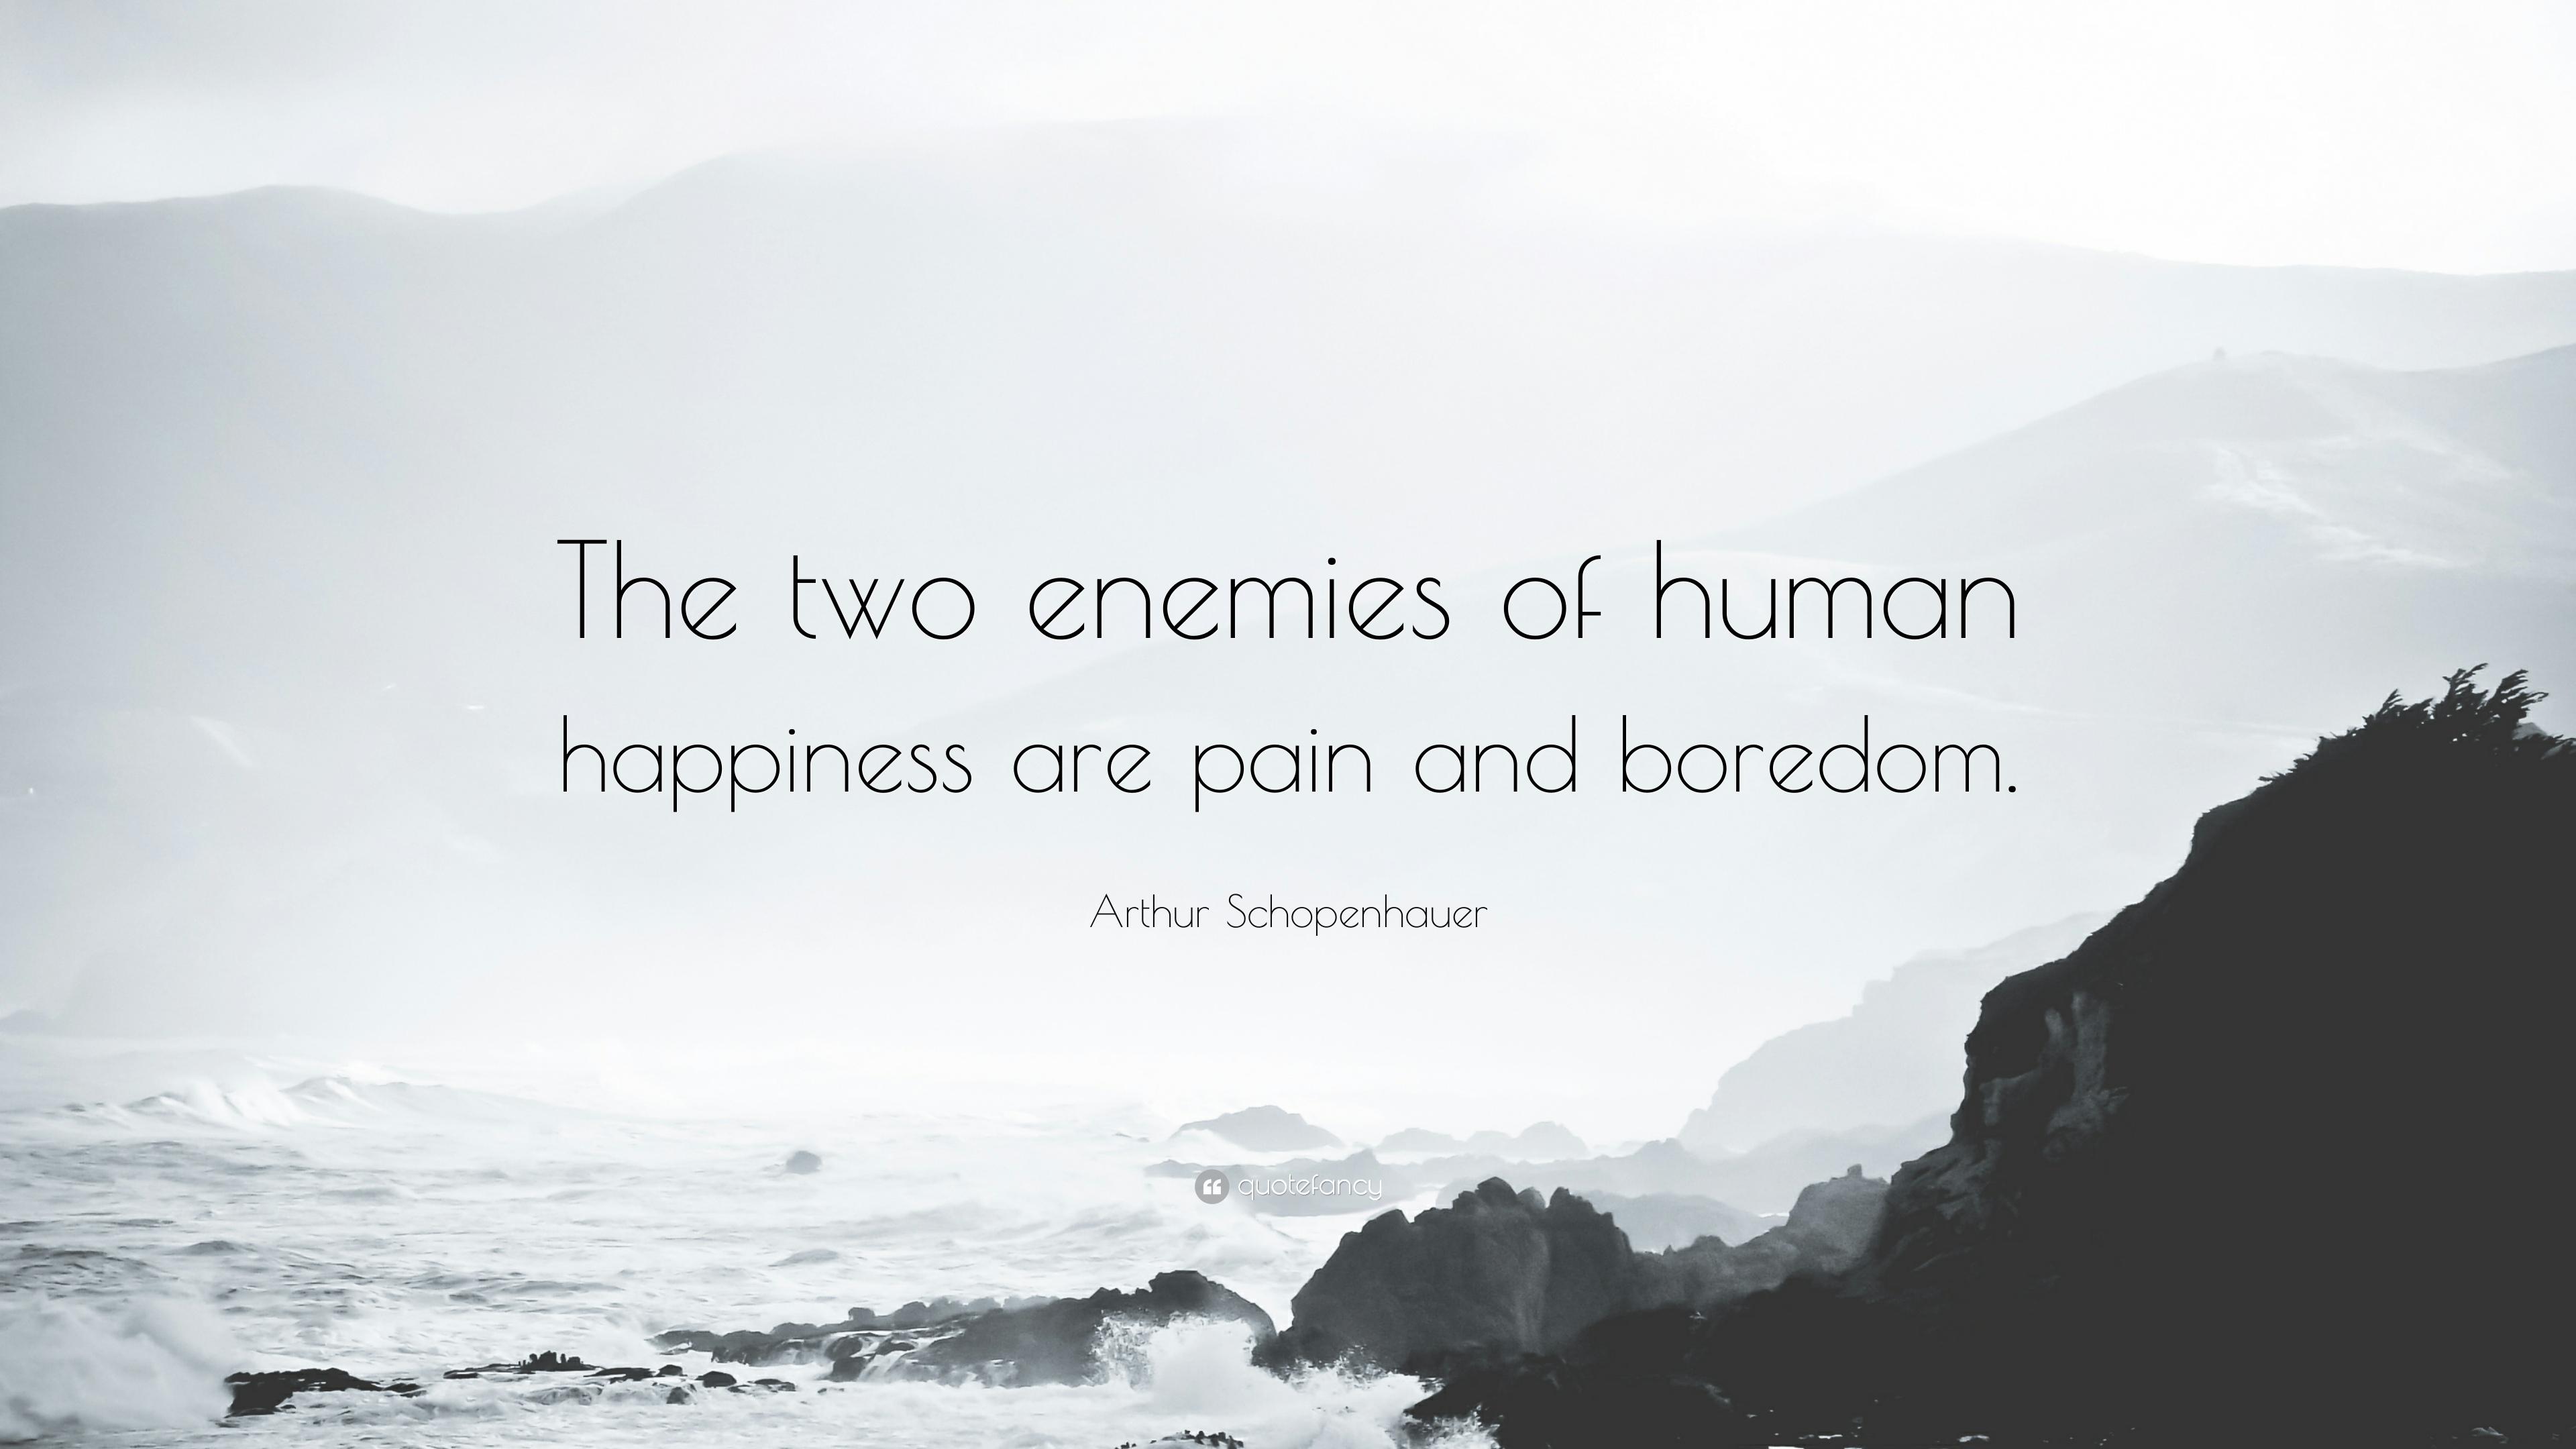 Arthur Schopenhauer Quote: “The two enemies of human